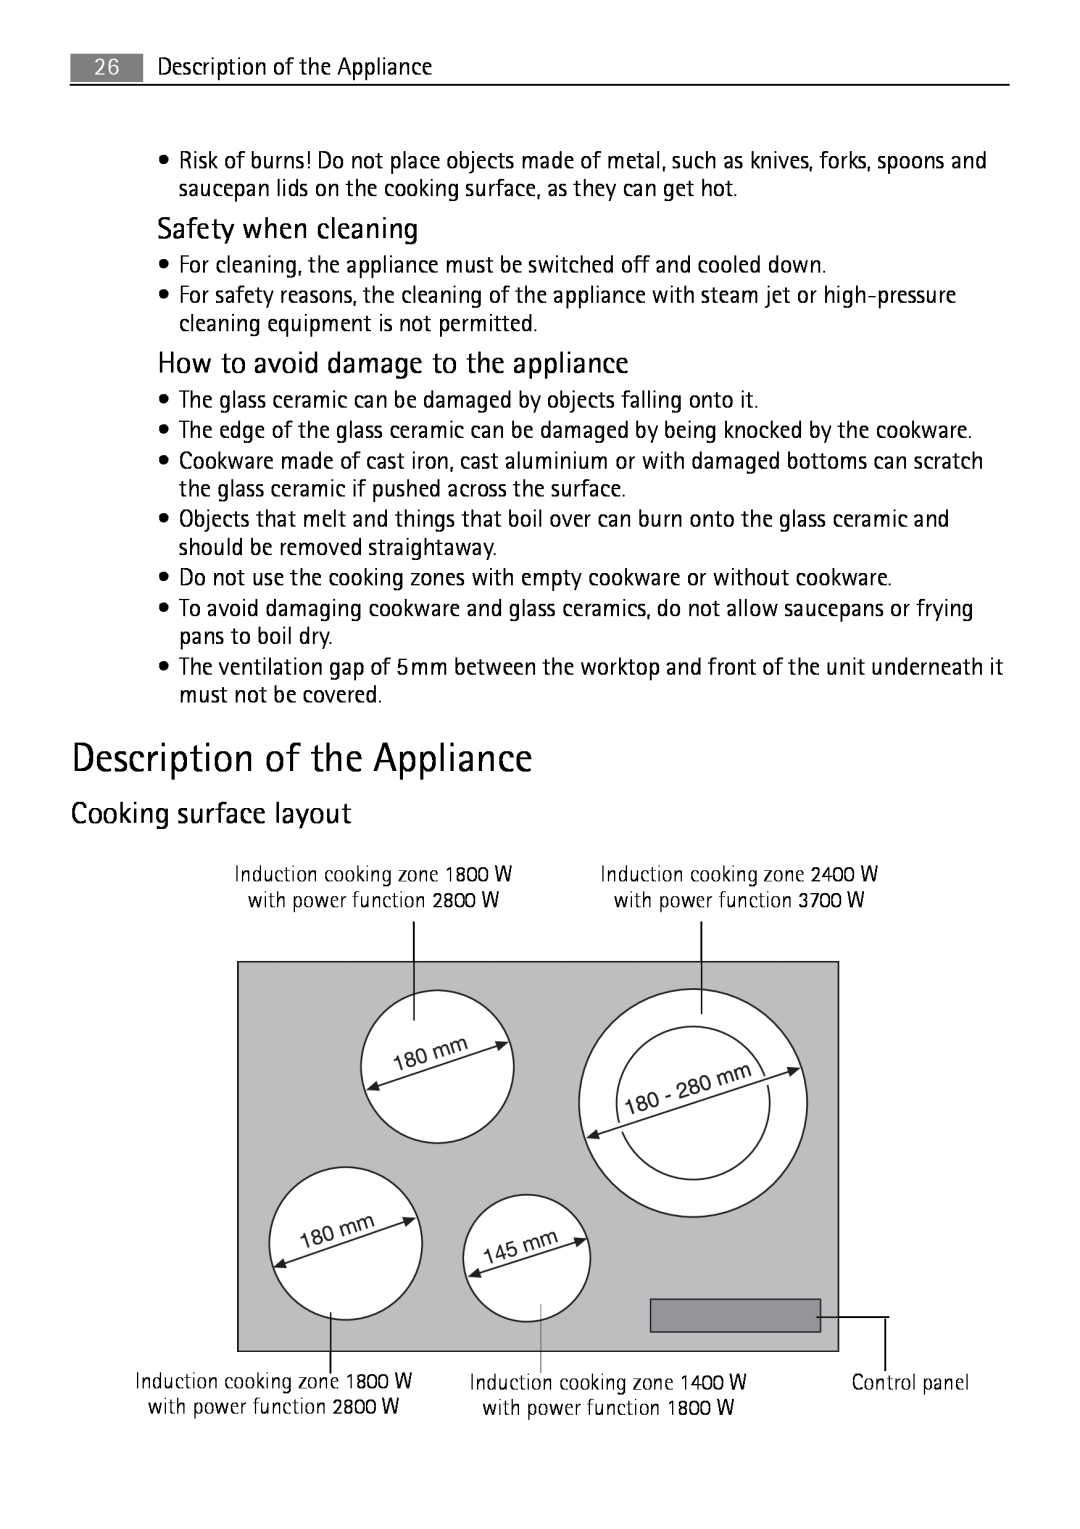 AEG 88131 K-MN user manual Description of the Appliance, Safety when cleaning, How to avoid damage to the appliance 